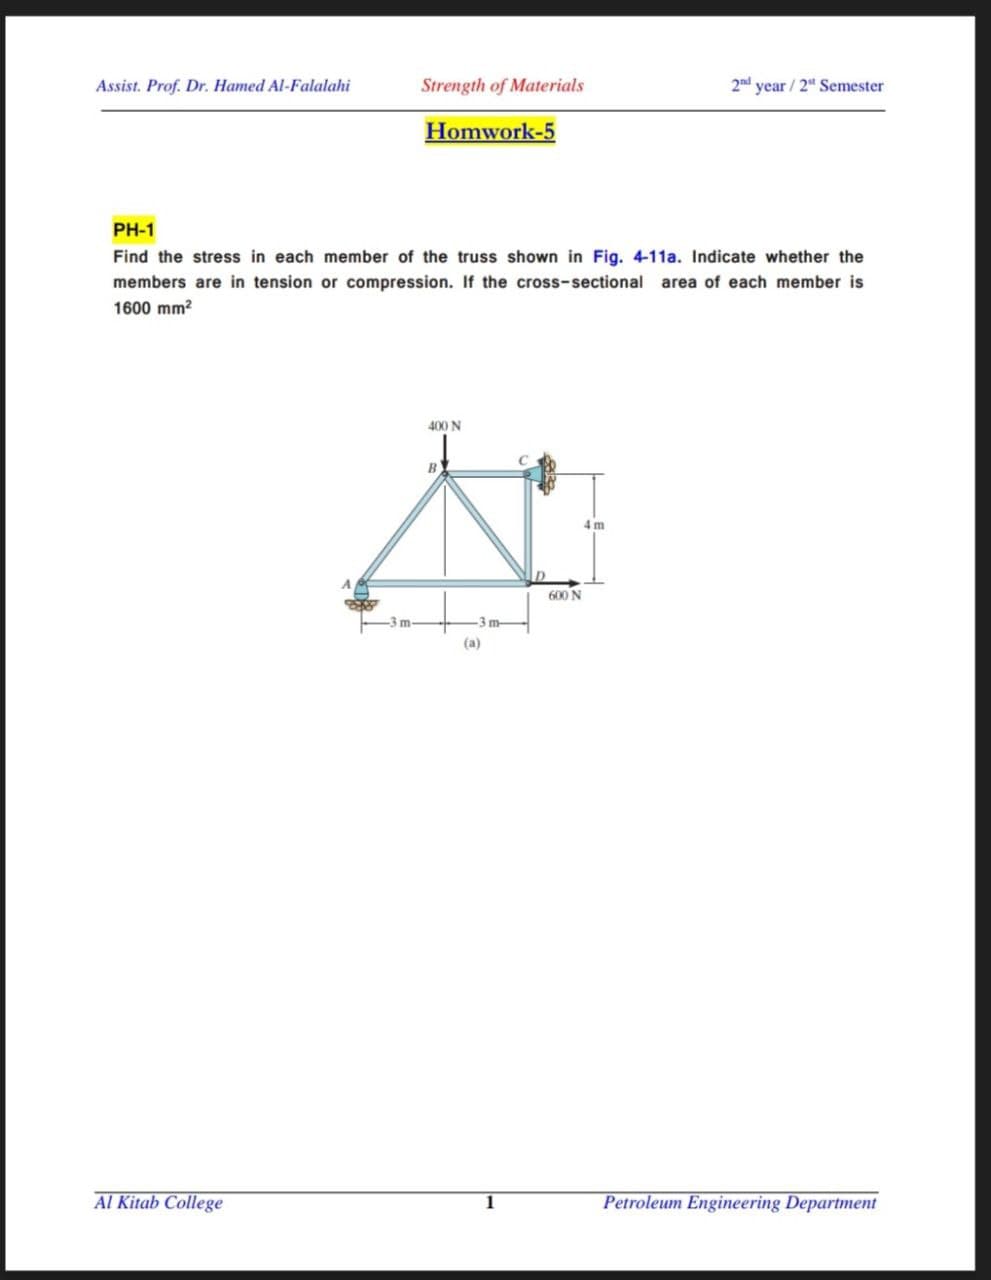 Assist. Prof. Dr. Hamed Al-Falalahi
Strength of Materials
2nd year / 2" Semester
Homwork-5
PH-1
Find the stress in each member of the truss shown in Fig. 4-11a. Indicate whether the
members are in tension or compression. If the cross-sectional area of each member is
1600 mm?
400 N
600 N
m-
-3 m-
(a)
Al Kitab College
Petroleum Engineering Department
1
